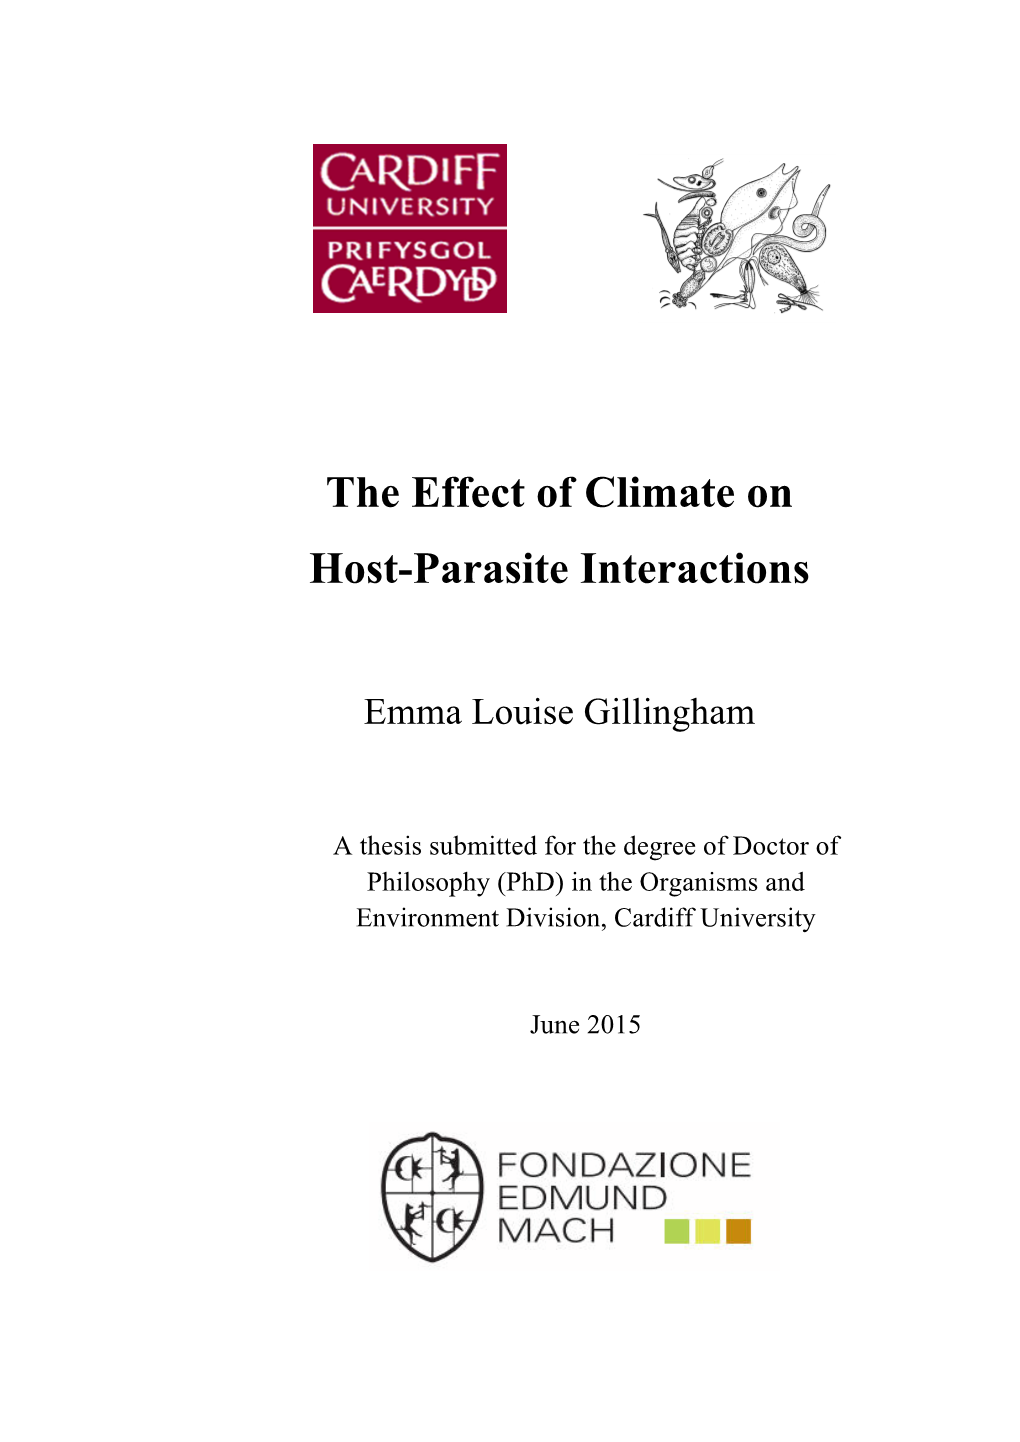 The Effect of Climate on Host-Parasite Interactions